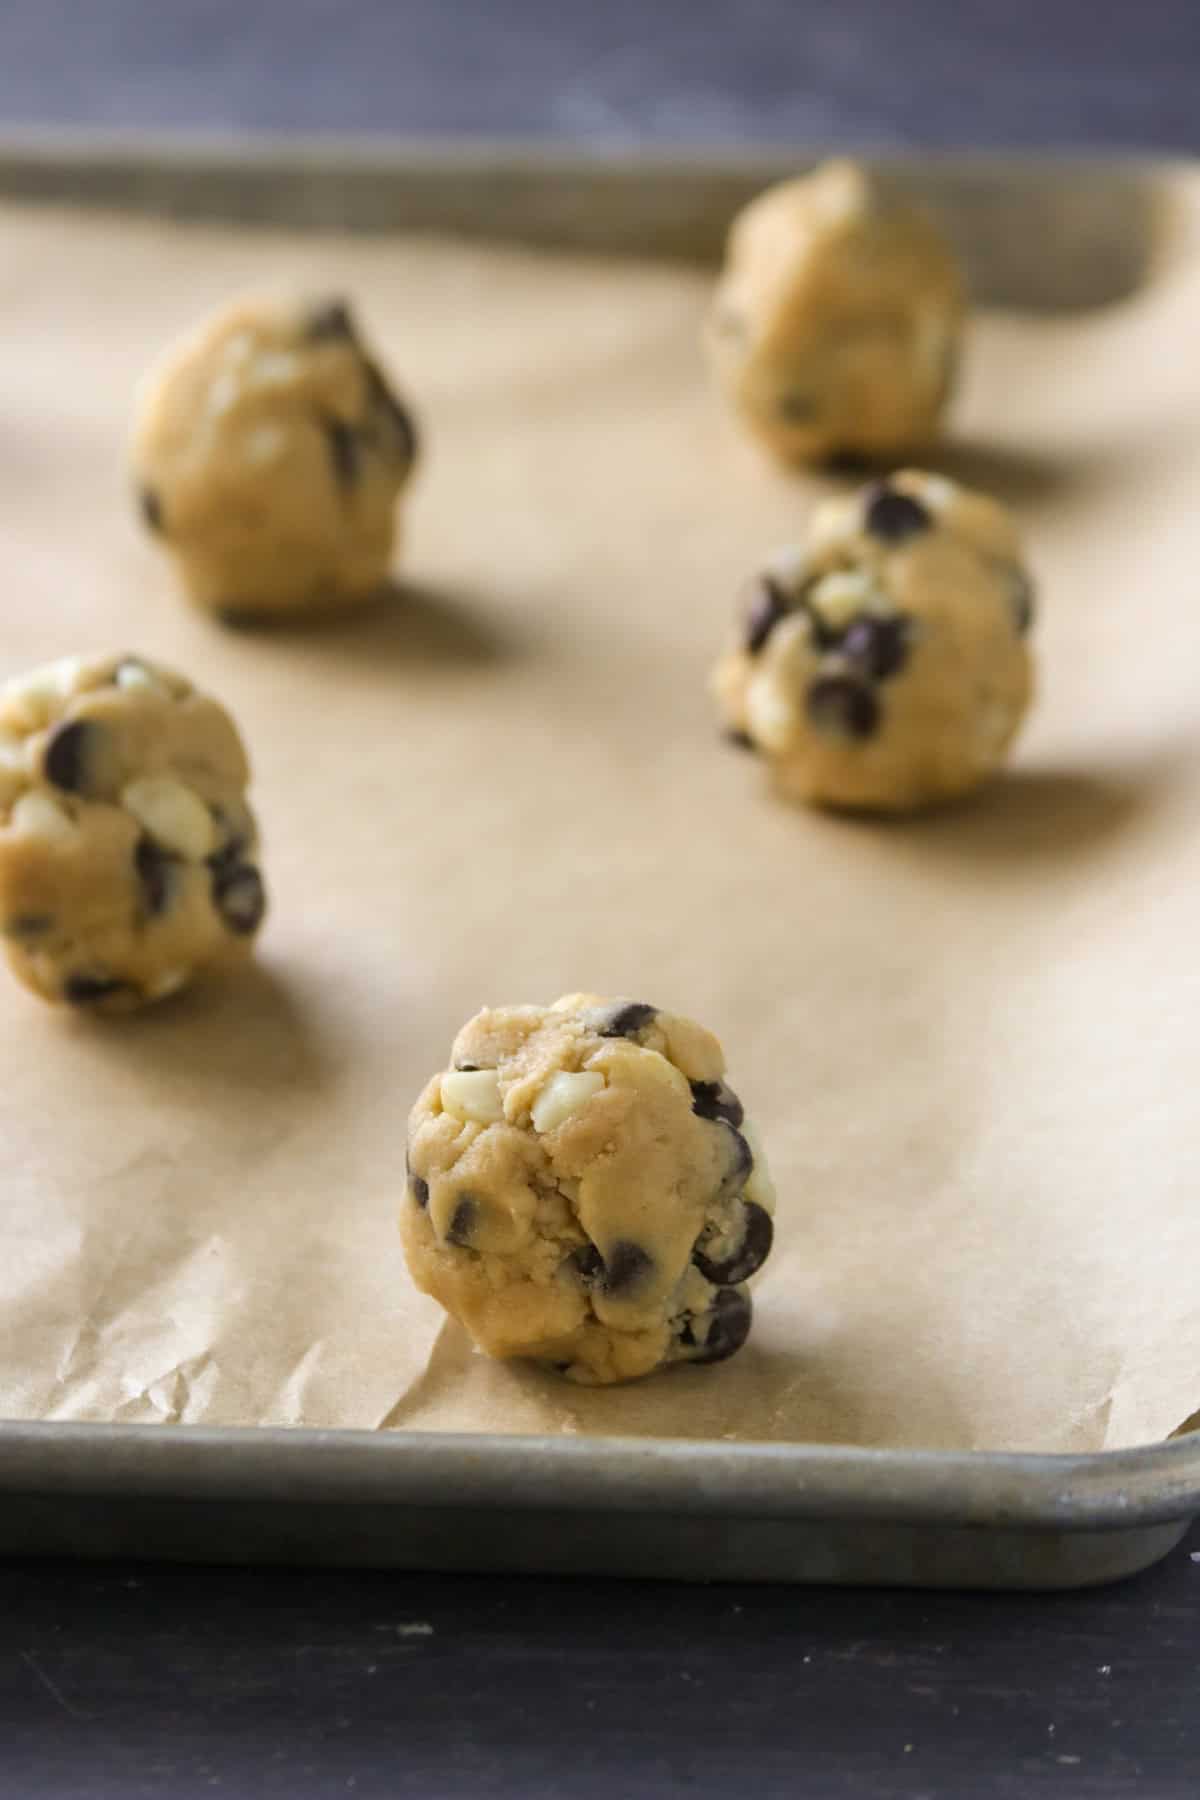 The shaped cookie dough. Tall circles.